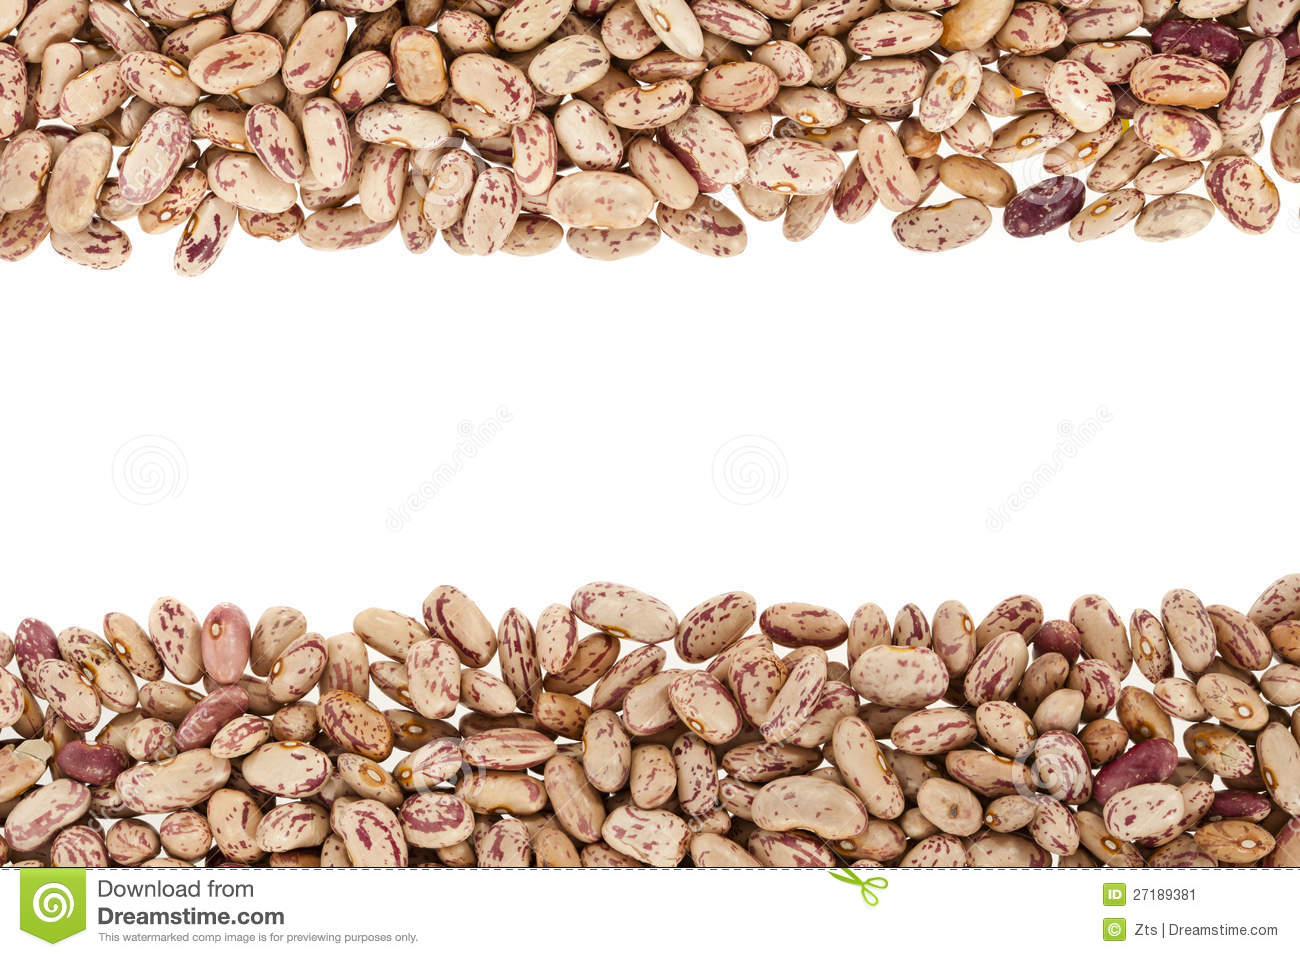 Pinto Beans Or Mottled Beans Stock Image   Image  27189381